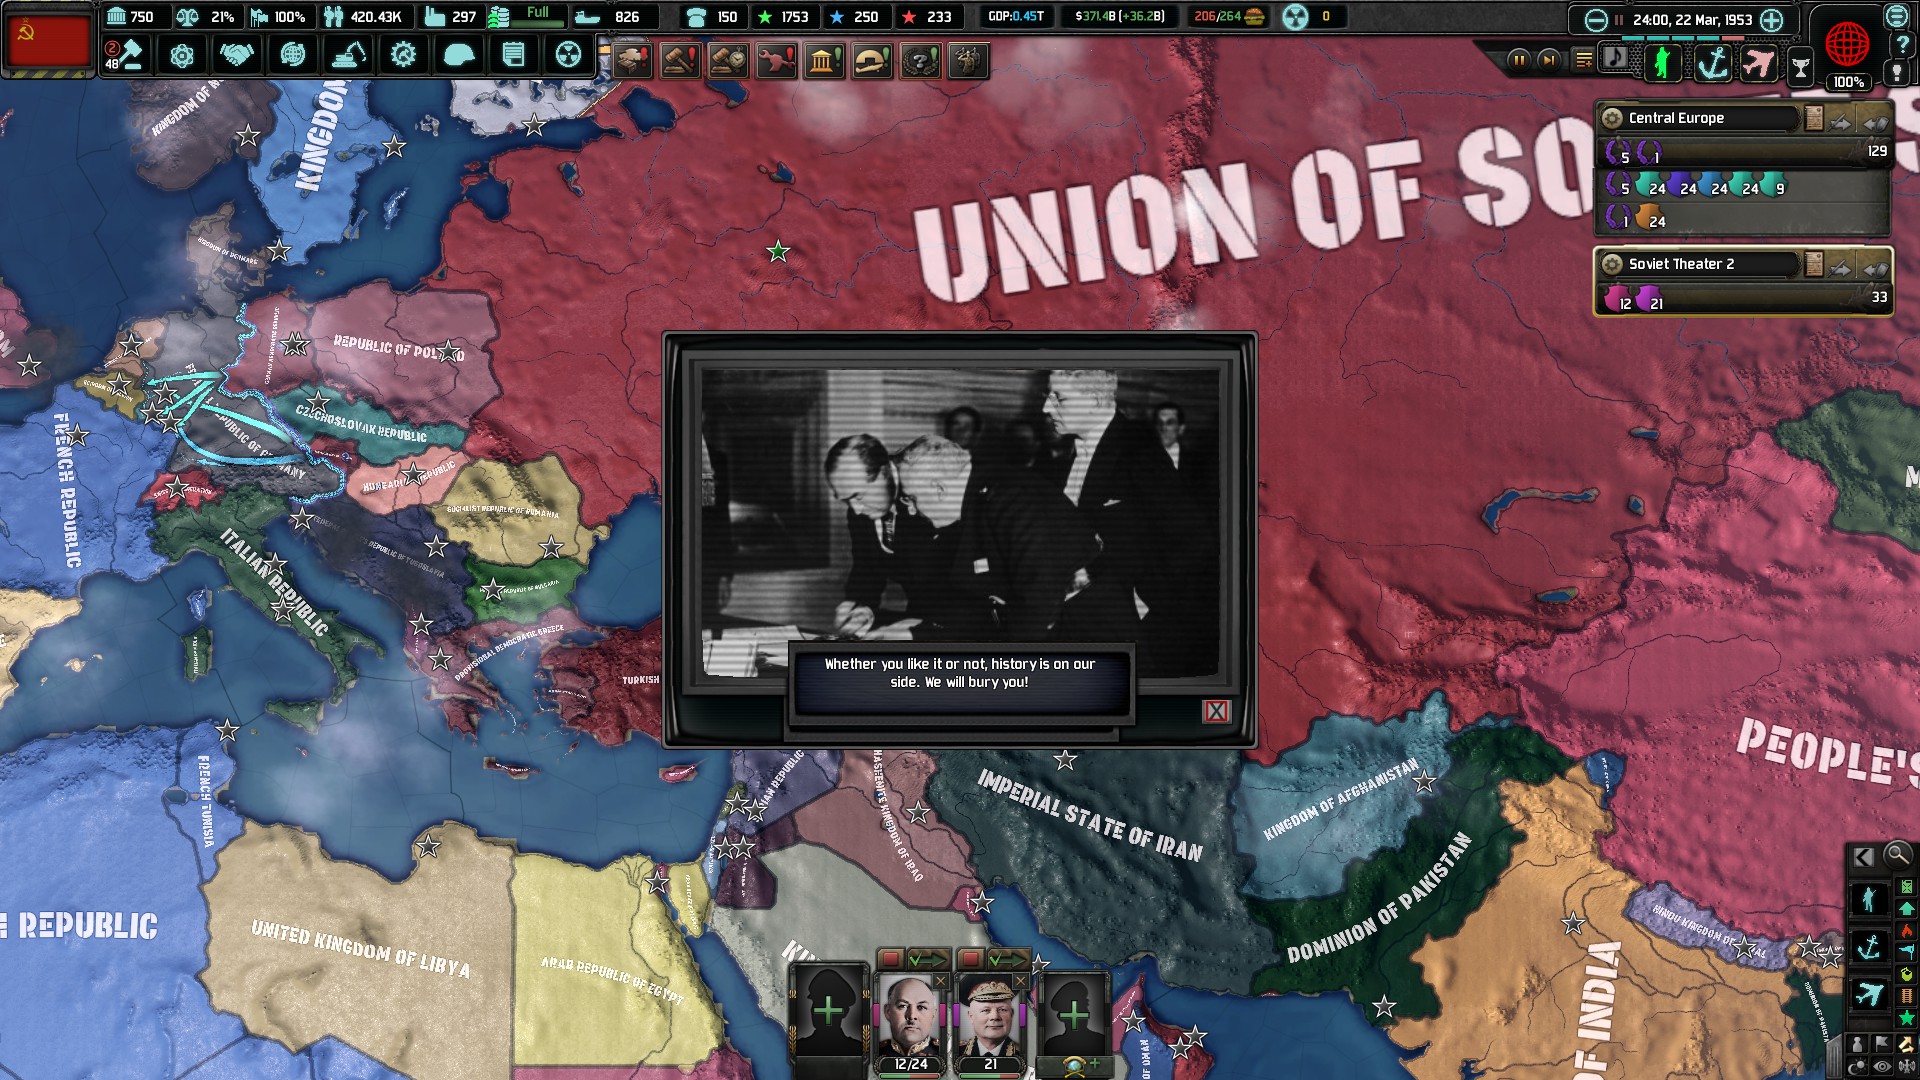 Hearts Of Iron 4 S Up And Coming Cold War Mod Has A Lot Of Potential But Doesn T Yet Capture The Era Wargamer